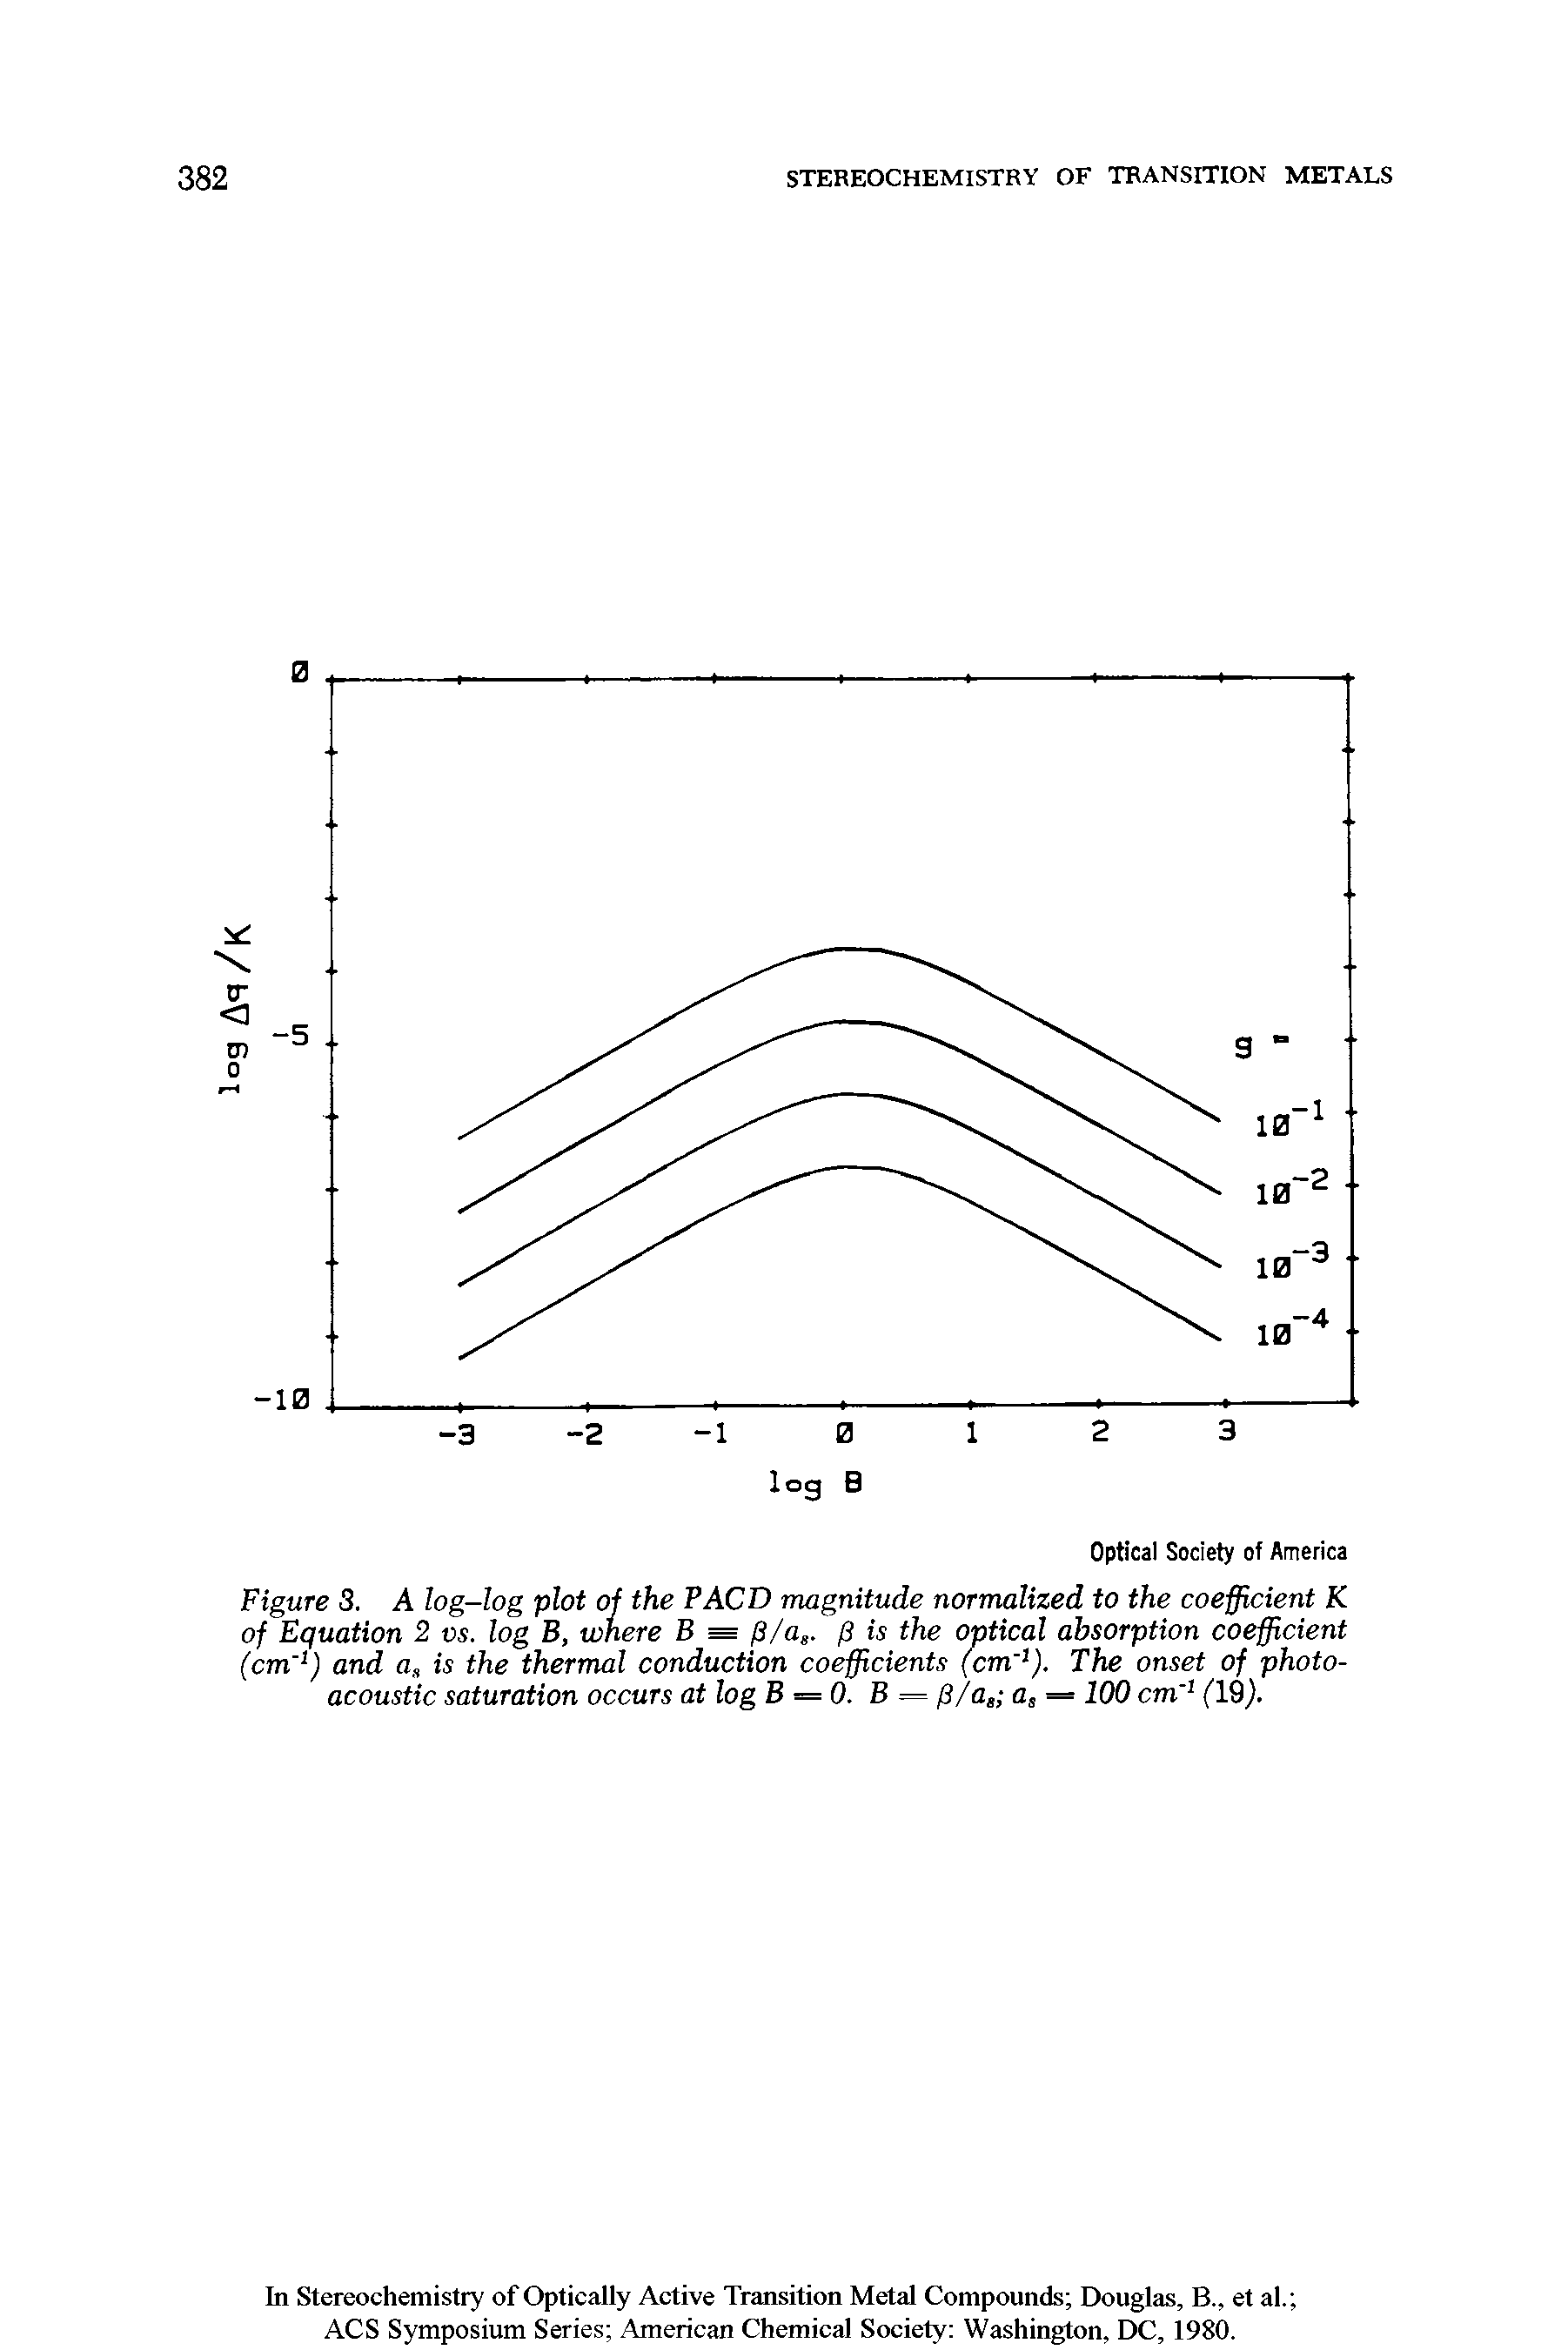 Figure 3. A log-log plot of the FACT) magnitude normalized to the coefficient K of Equation 2 vs. log B, where B = ft/as. ft is the optical absorption coefficient (cm 1) and a is the thermal conduction coefficients (cm 1). The onset of photoacoustic saturation occurs at logB = 0. B = ft/as as = 100 cm 1 ( 19).